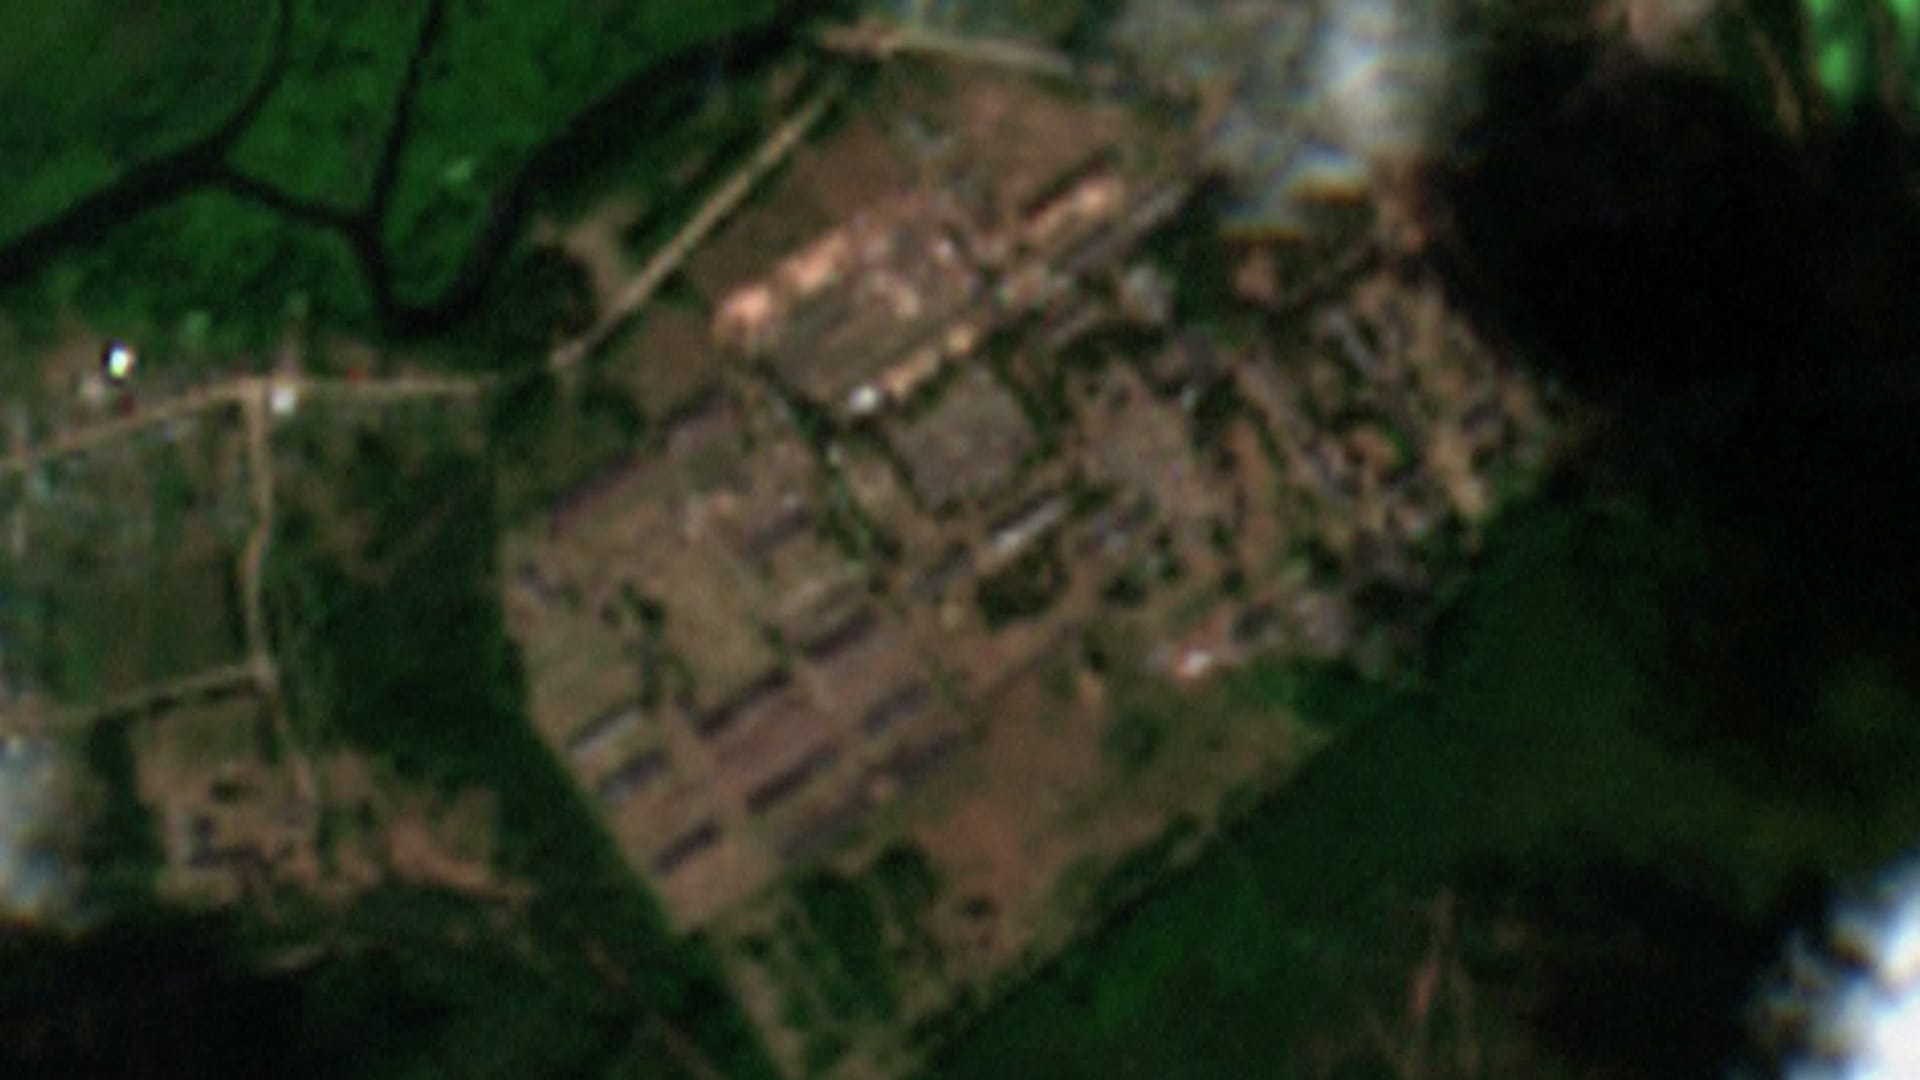 Satellite images appearing to show new facilities set up in recent days at a vacant military base southeast of the Belarus capital Minsk.